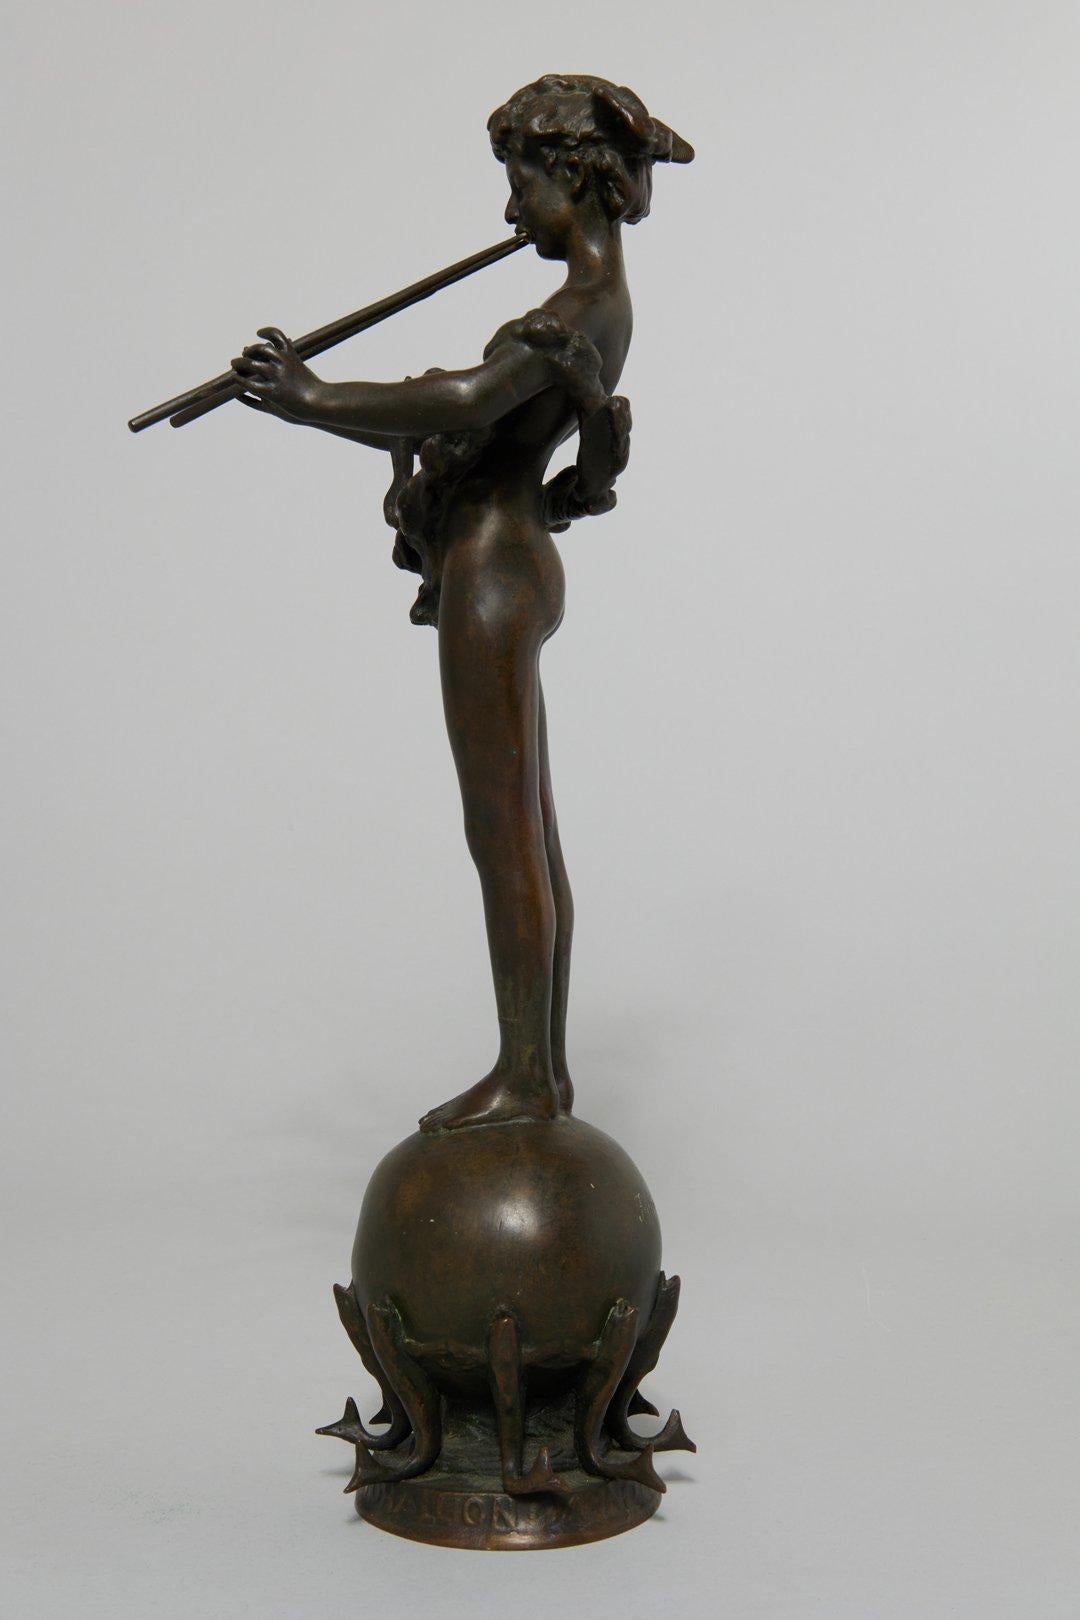 Pan of Rohallion, 1889-90 classical bronze sculpture - Sculpture by Frederick William MacMonnies